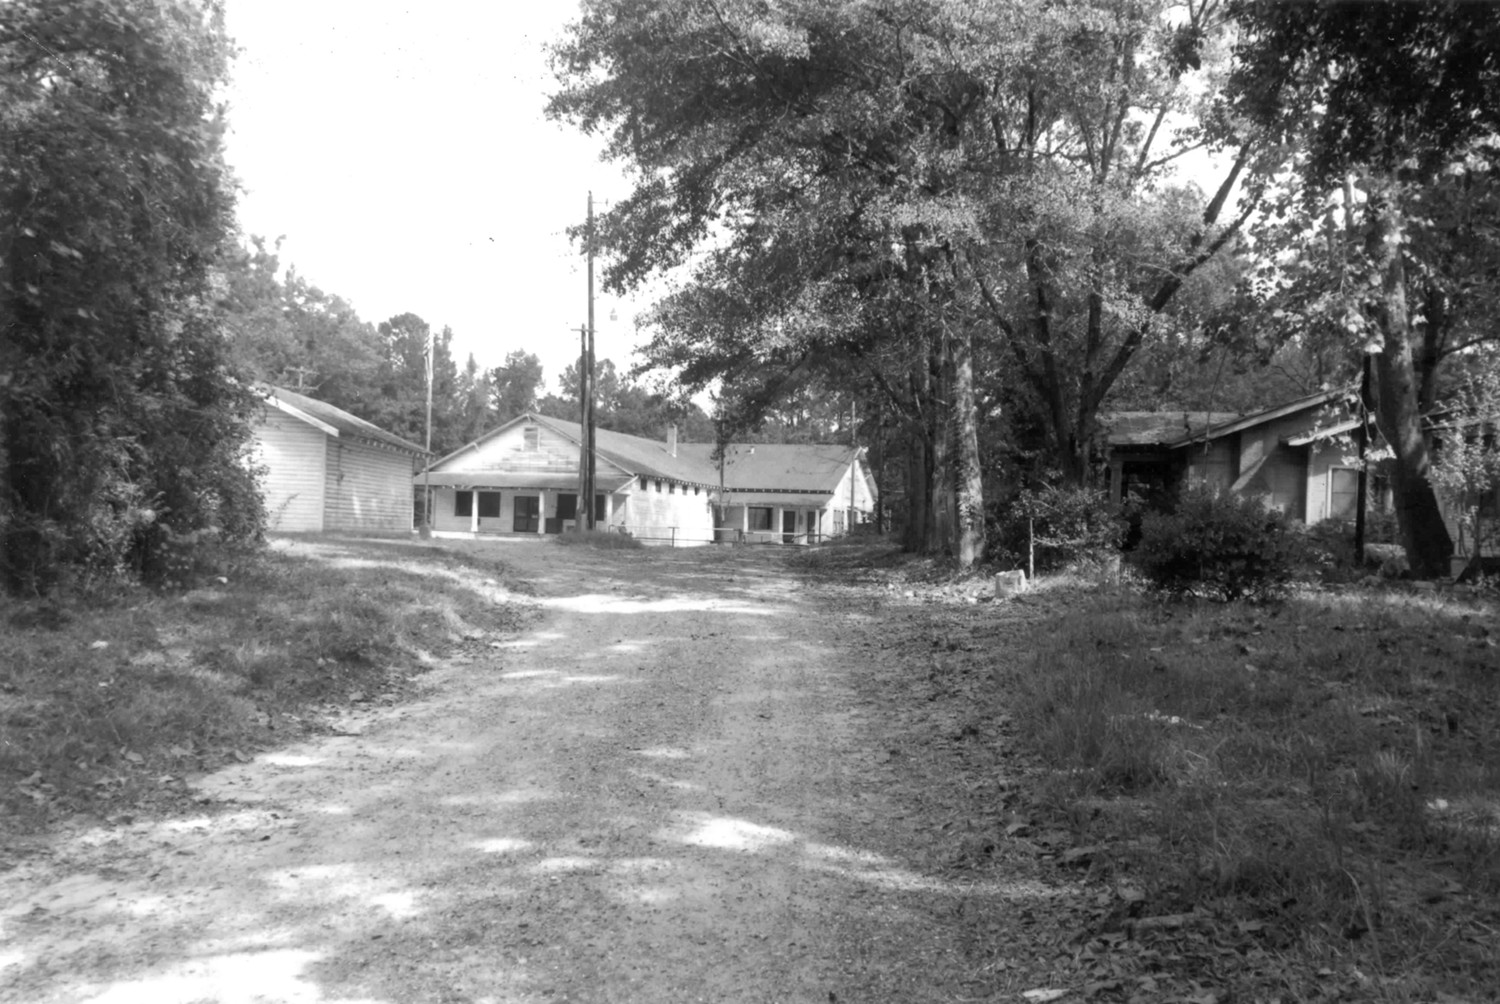 Crowell Sawmill Complex, Longleaf Louisiana Rear of Post Office, Commissary, and Worker's House (1992)